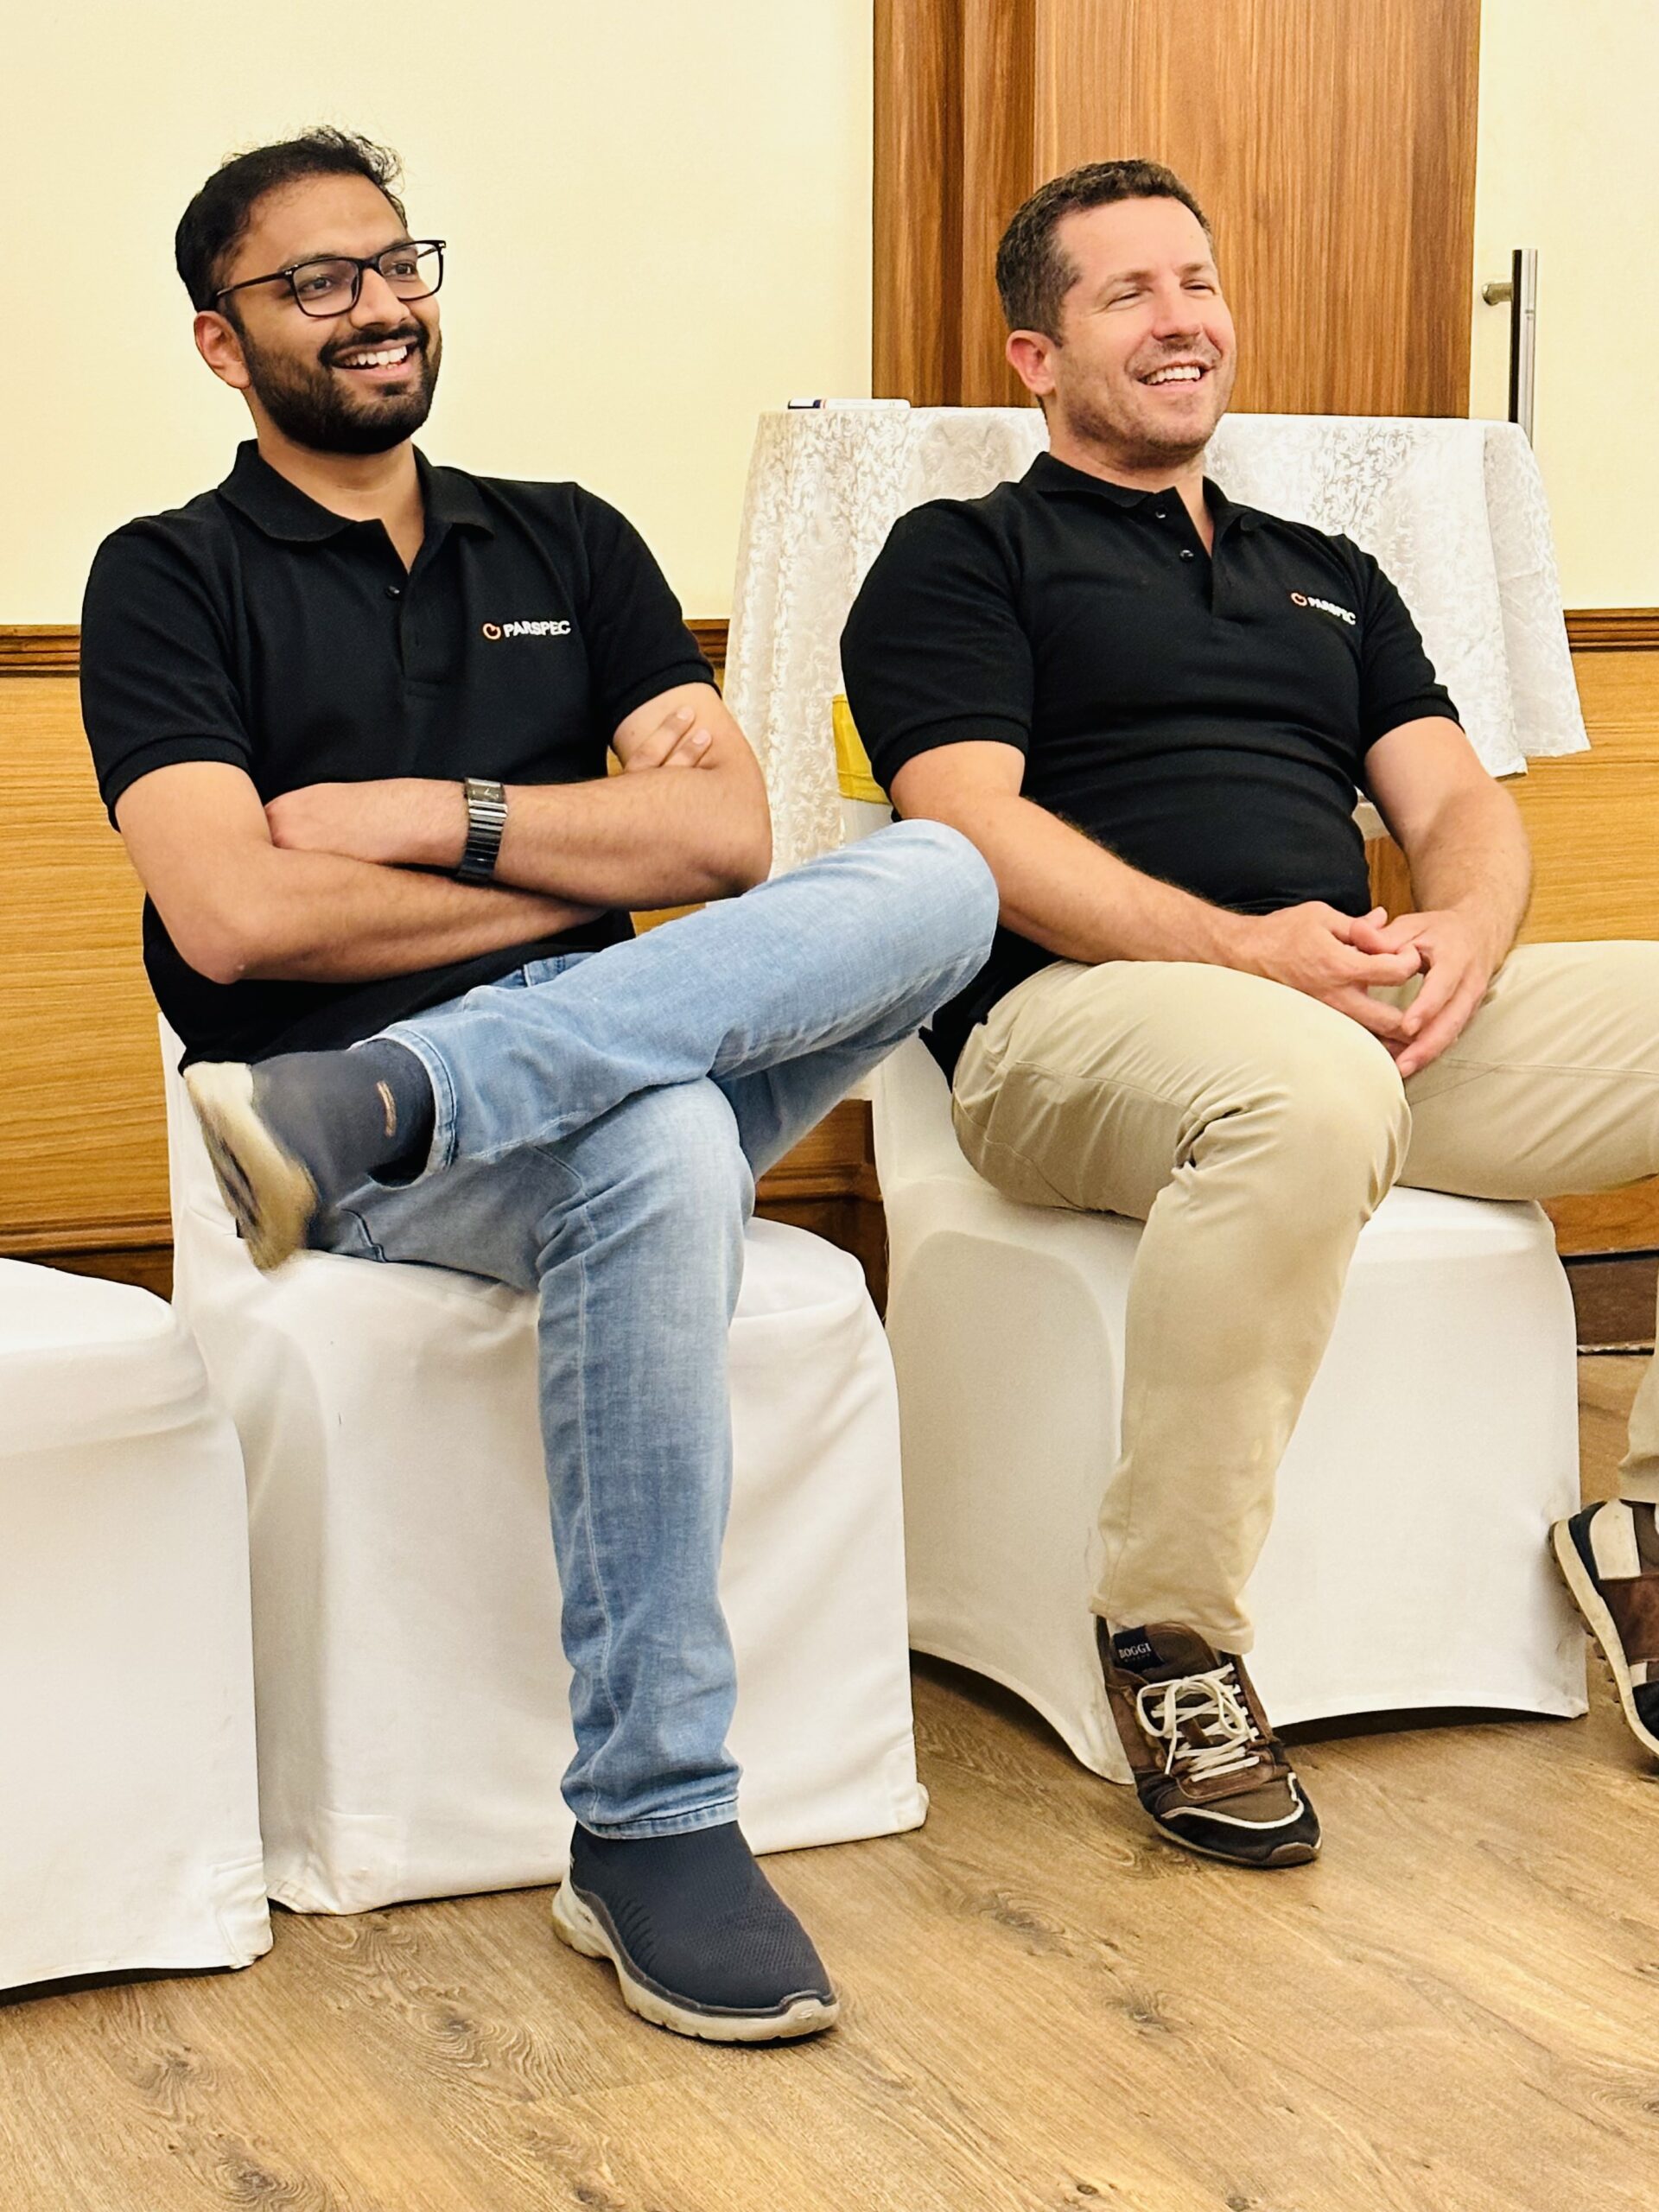 Parspec Co-founders Pratyush Havelia and Forest Flager